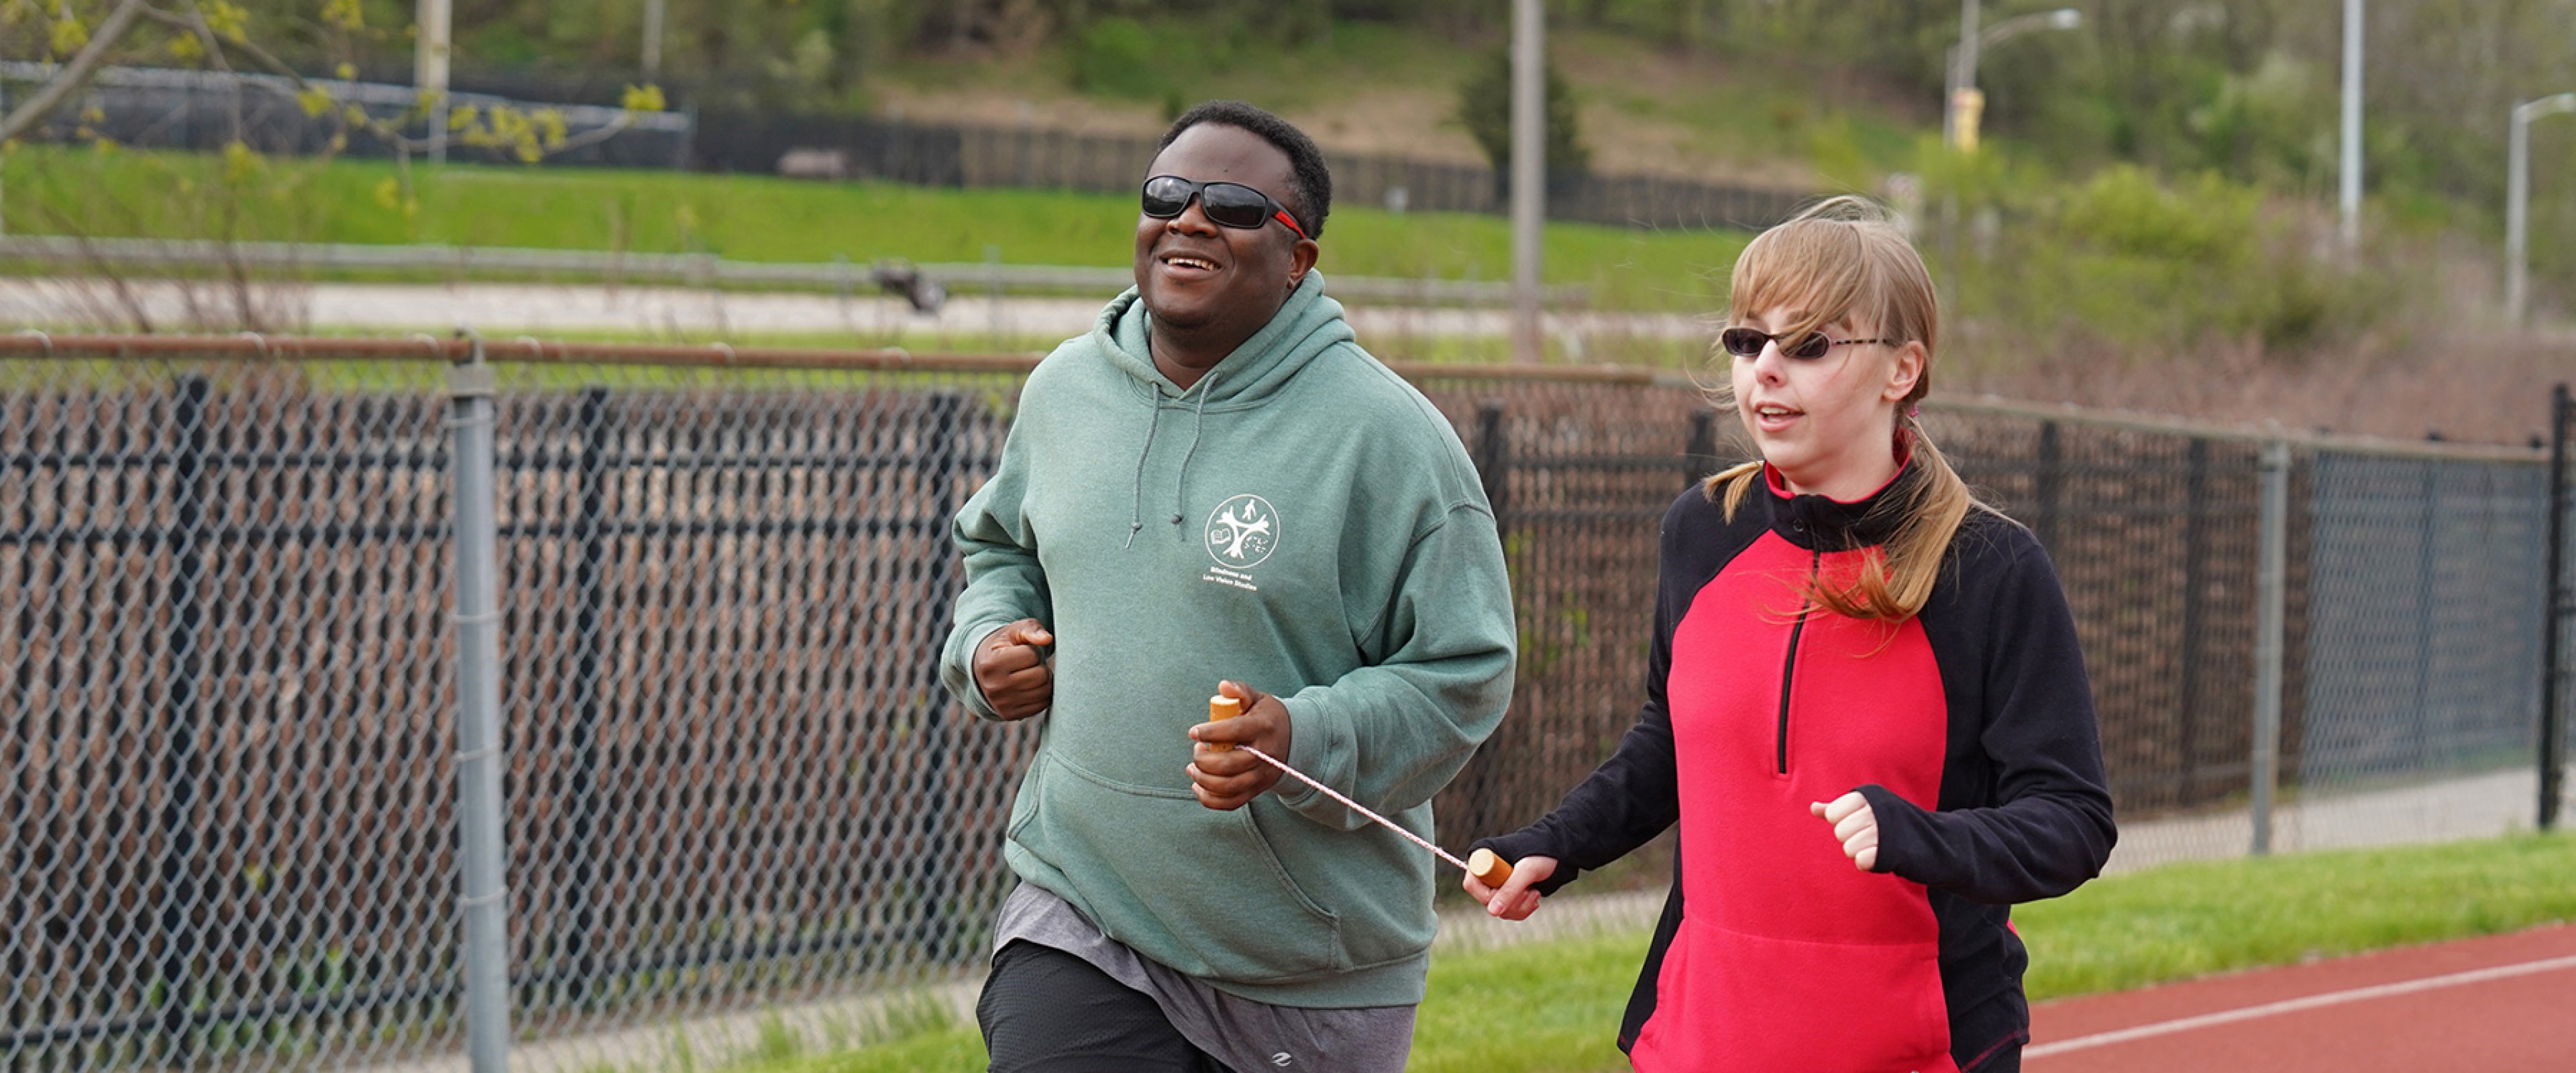 WMU student Osman Koroma exercising outdoors by running Western's track with an assistant